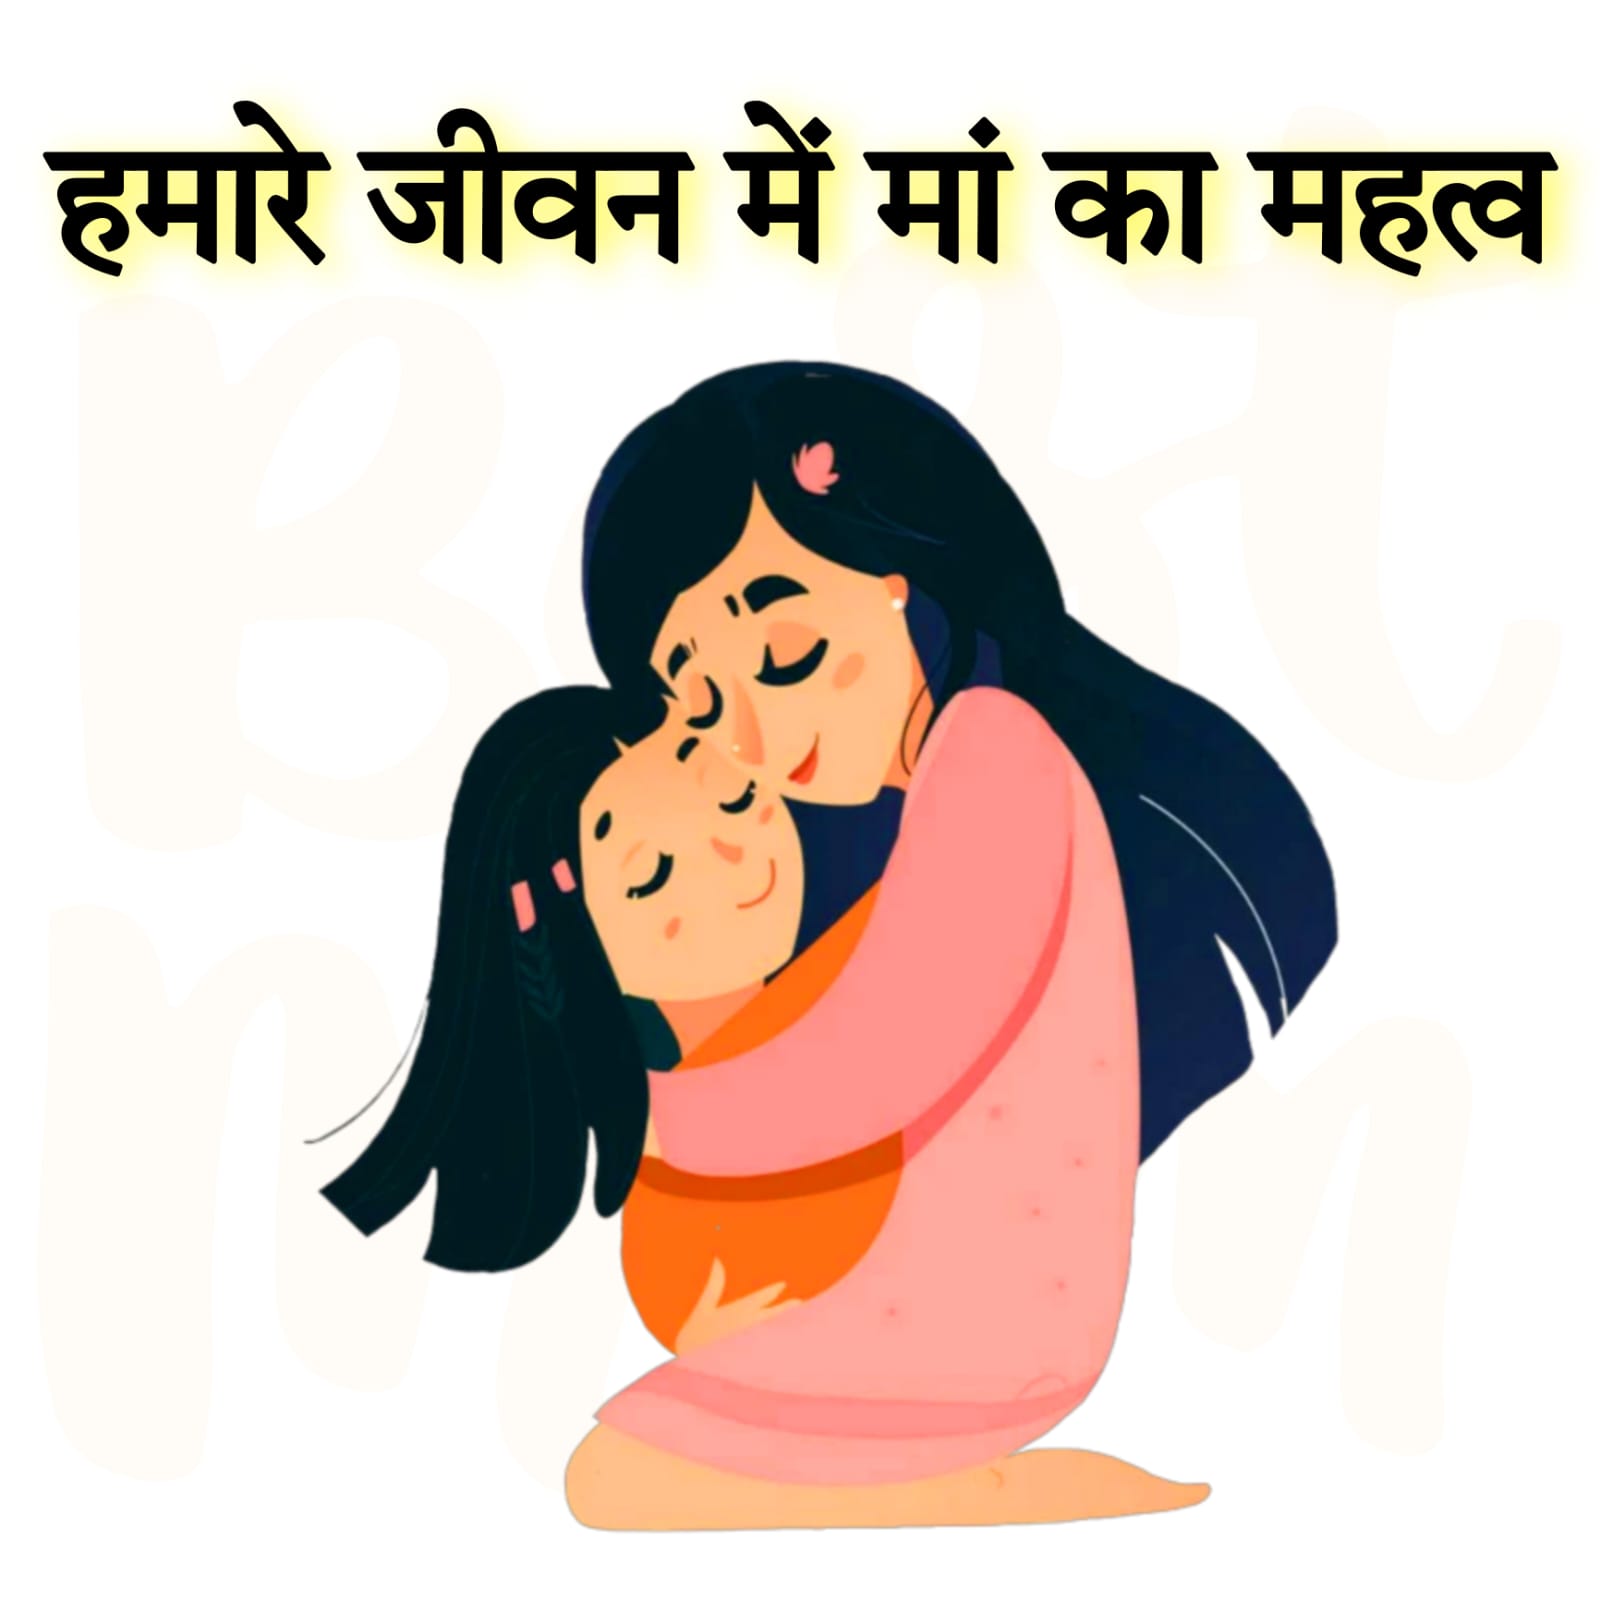 जीवन में मां का महत्व | हमारे जीवन में माँ का महत्व क्या है | Importance of Mother in our life in Hindi